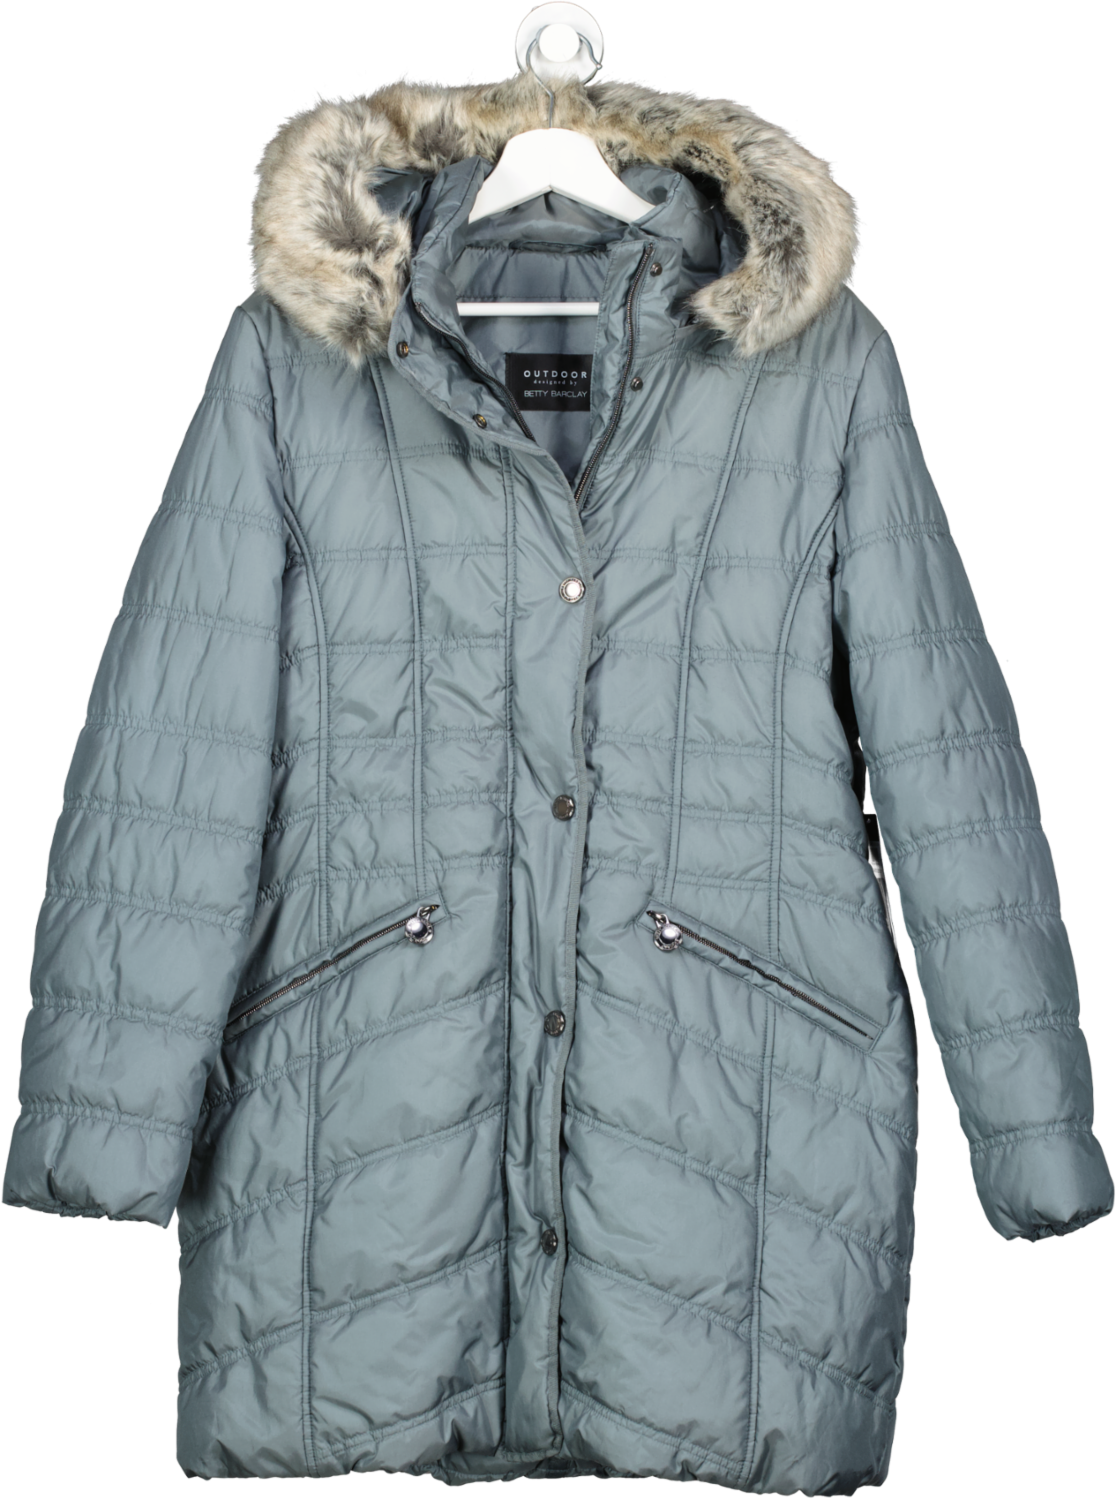 betty barclay Grey Quilted Puffer Jacket With Faux Fur Trimmed Hood BNWT UK 16